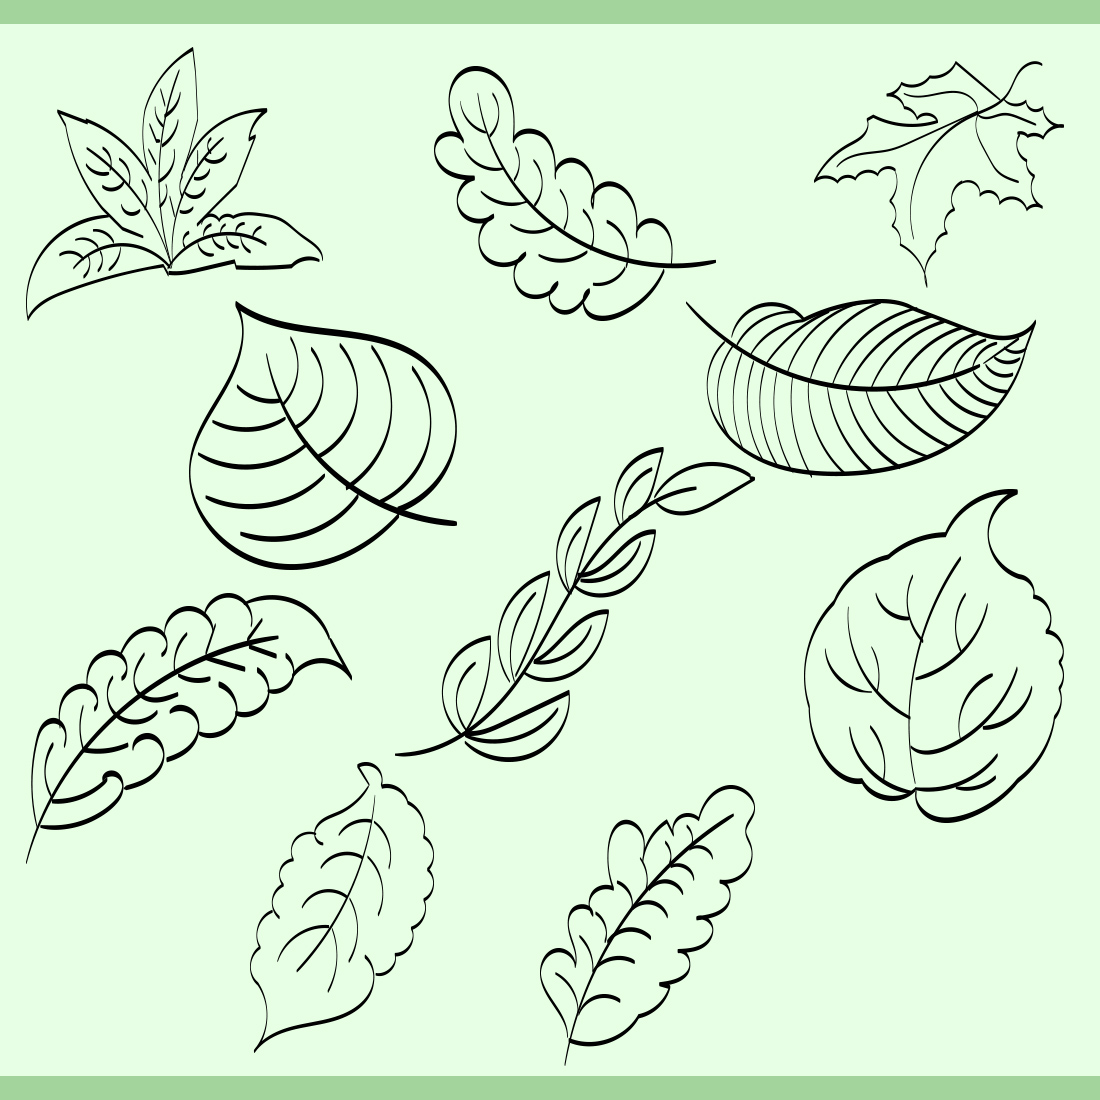 Small Bush Of Grass Hand Drawn Doodle Sketch Twigs With Oblong Leaves Black  Outline Plant For Postcard Poster Design Element Stock Vector Illustration  Isolated On White Background Stock Illustration - Download Image